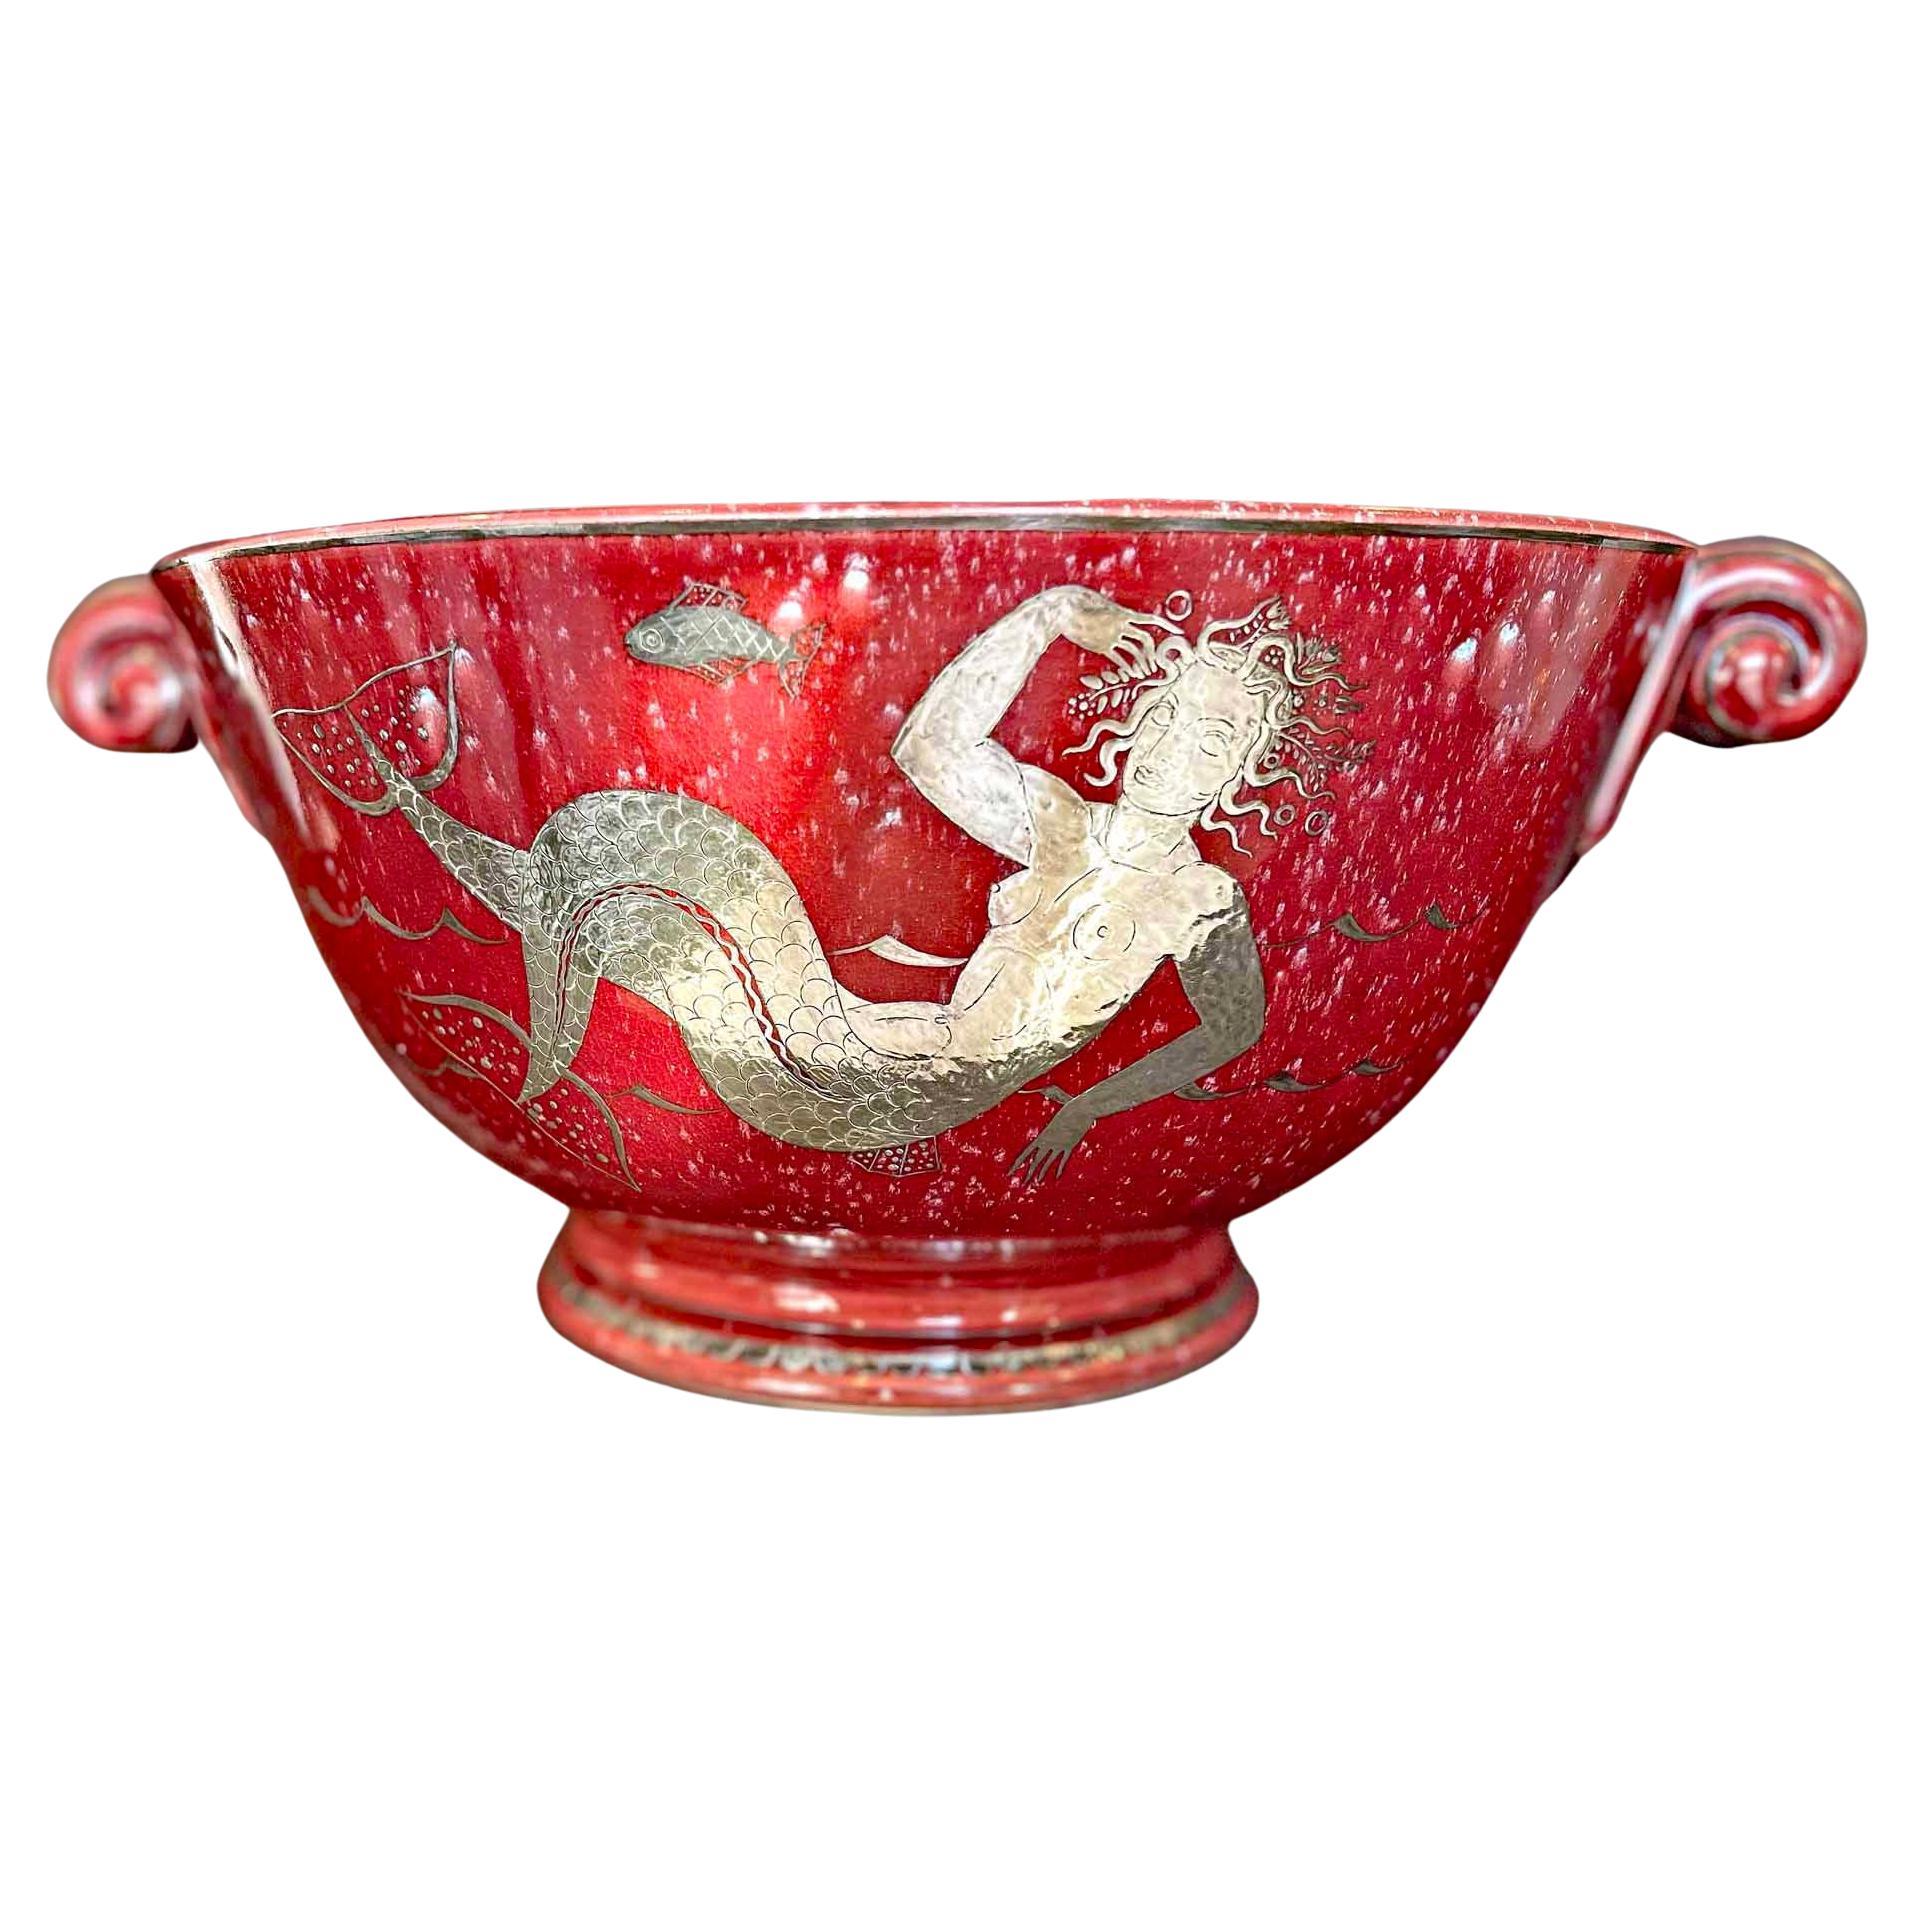 "Mermaid and Starfish", Rare and Striking Art Deco Bowl in Rare Red & Silver For Sale